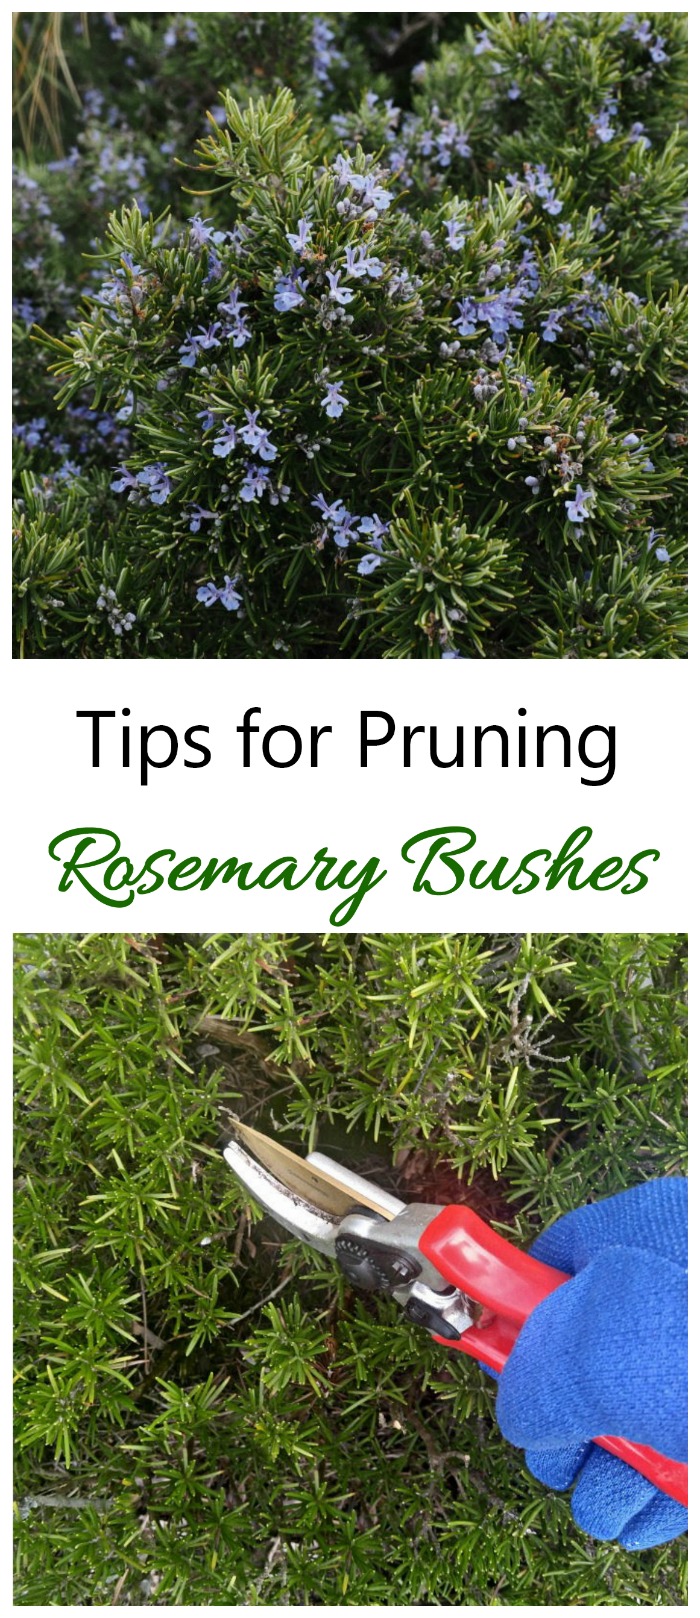 Pruning Rosemary How And When To Prune Rosemary Plants Bushes,Kitchen Cabinet Soffit Lighting